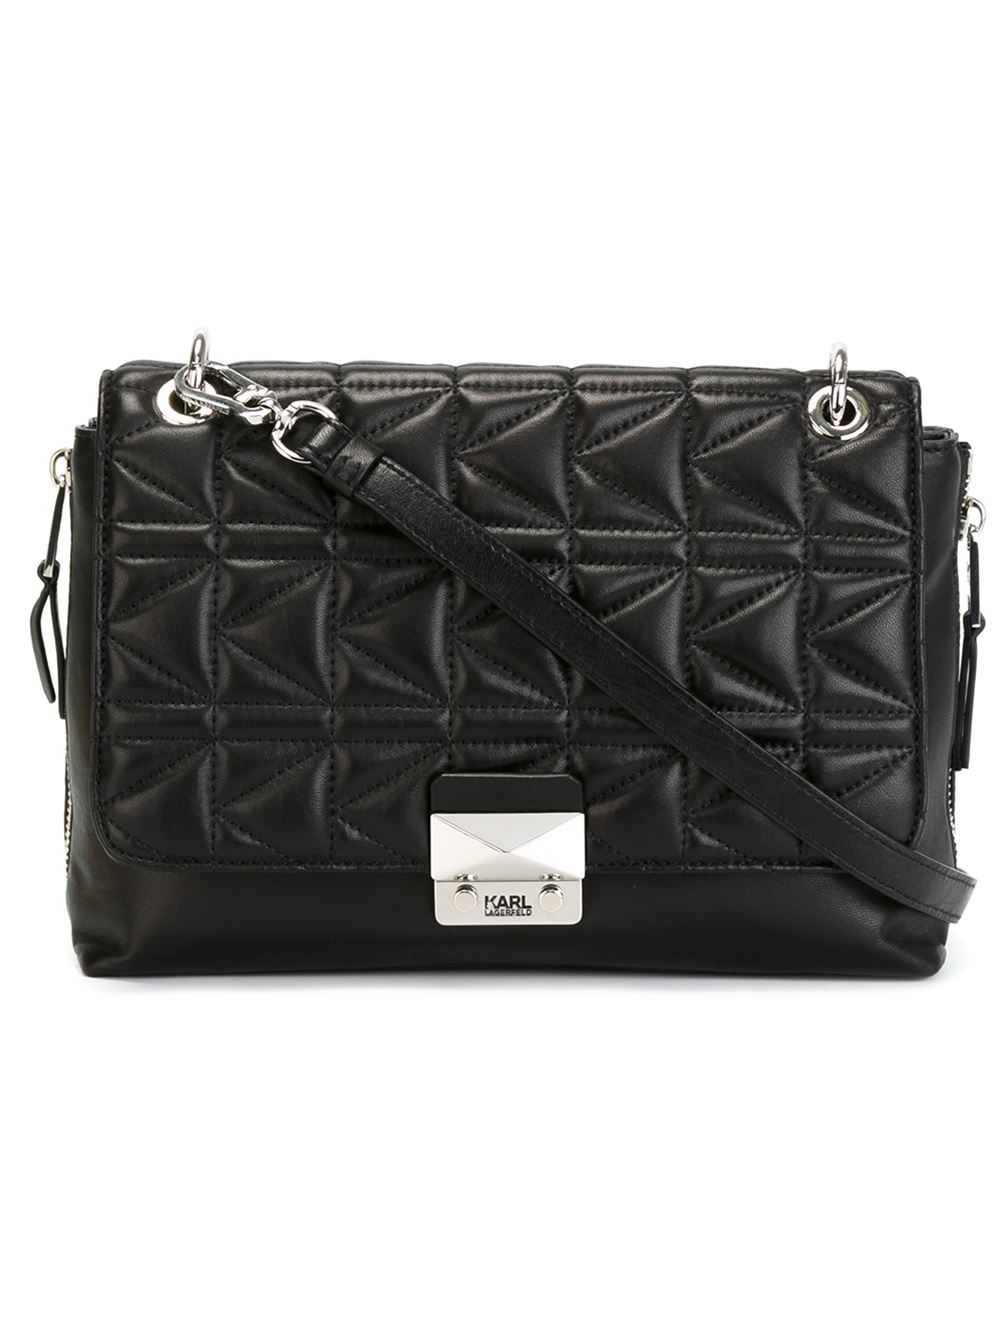 Karl Lagerfeld Large Quilted-Leather Cross-Body Bag in Black - Lyst